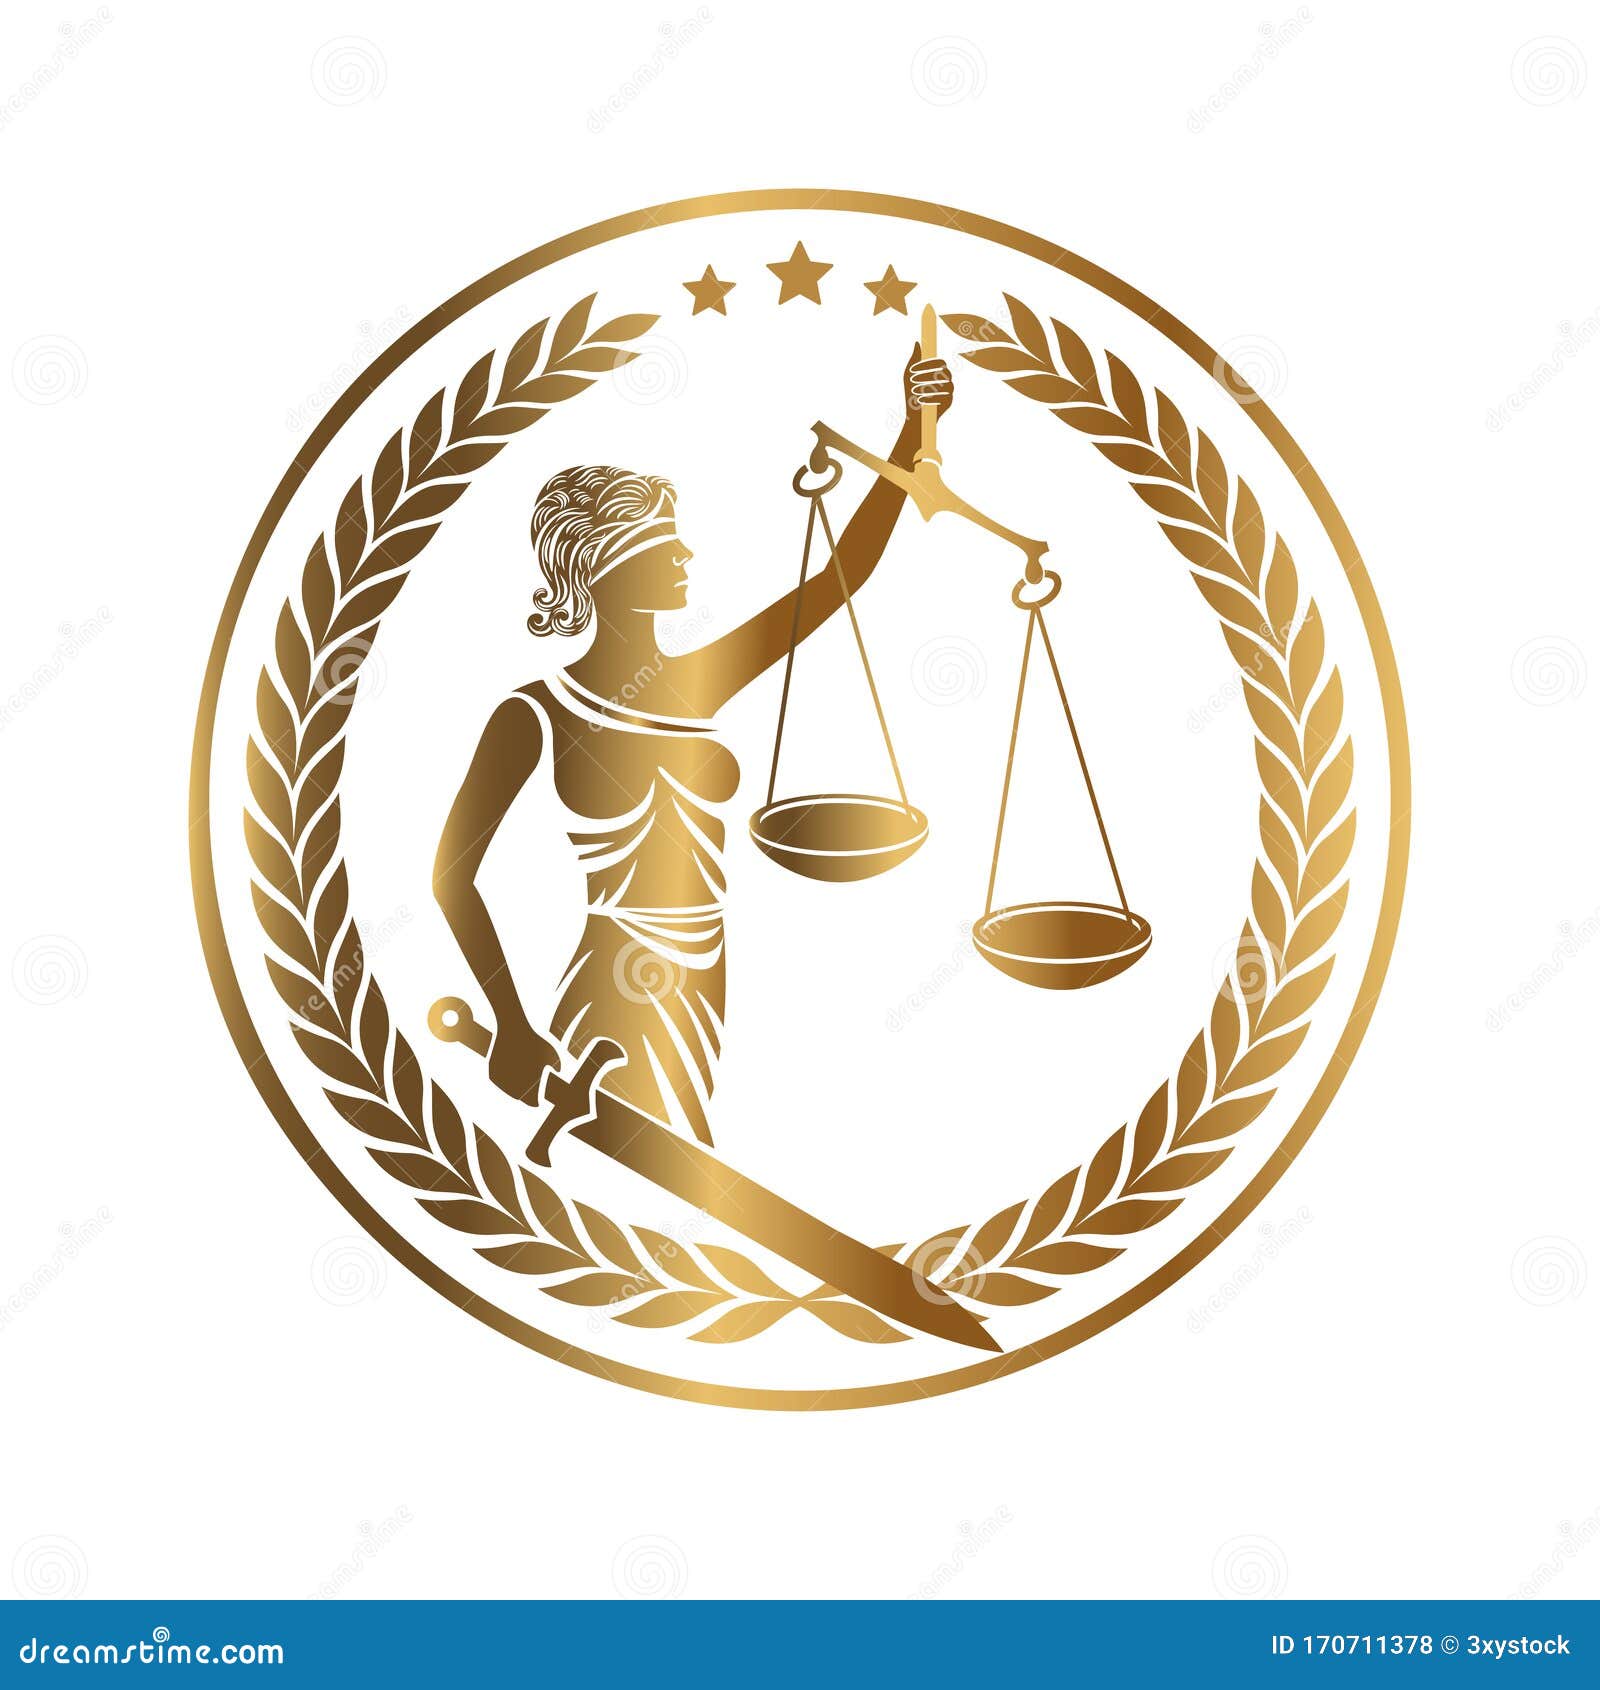 Lady Justice Themis Golden Emblem Stock Vector - Illustration of ...